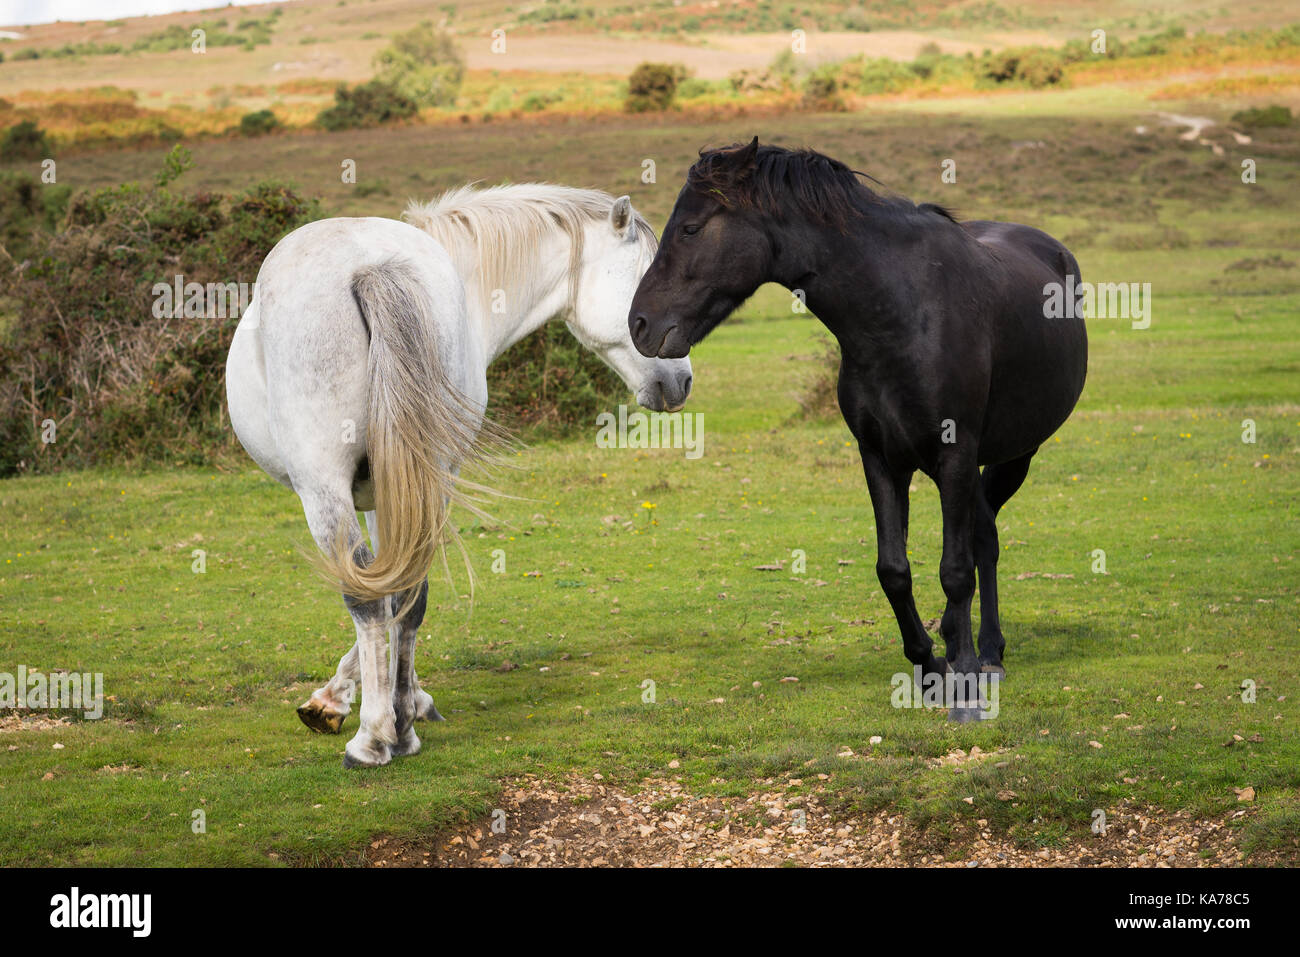 Two horses, one black, one white, perform a courtship dance, rotating in a playful circle. Stock Photo